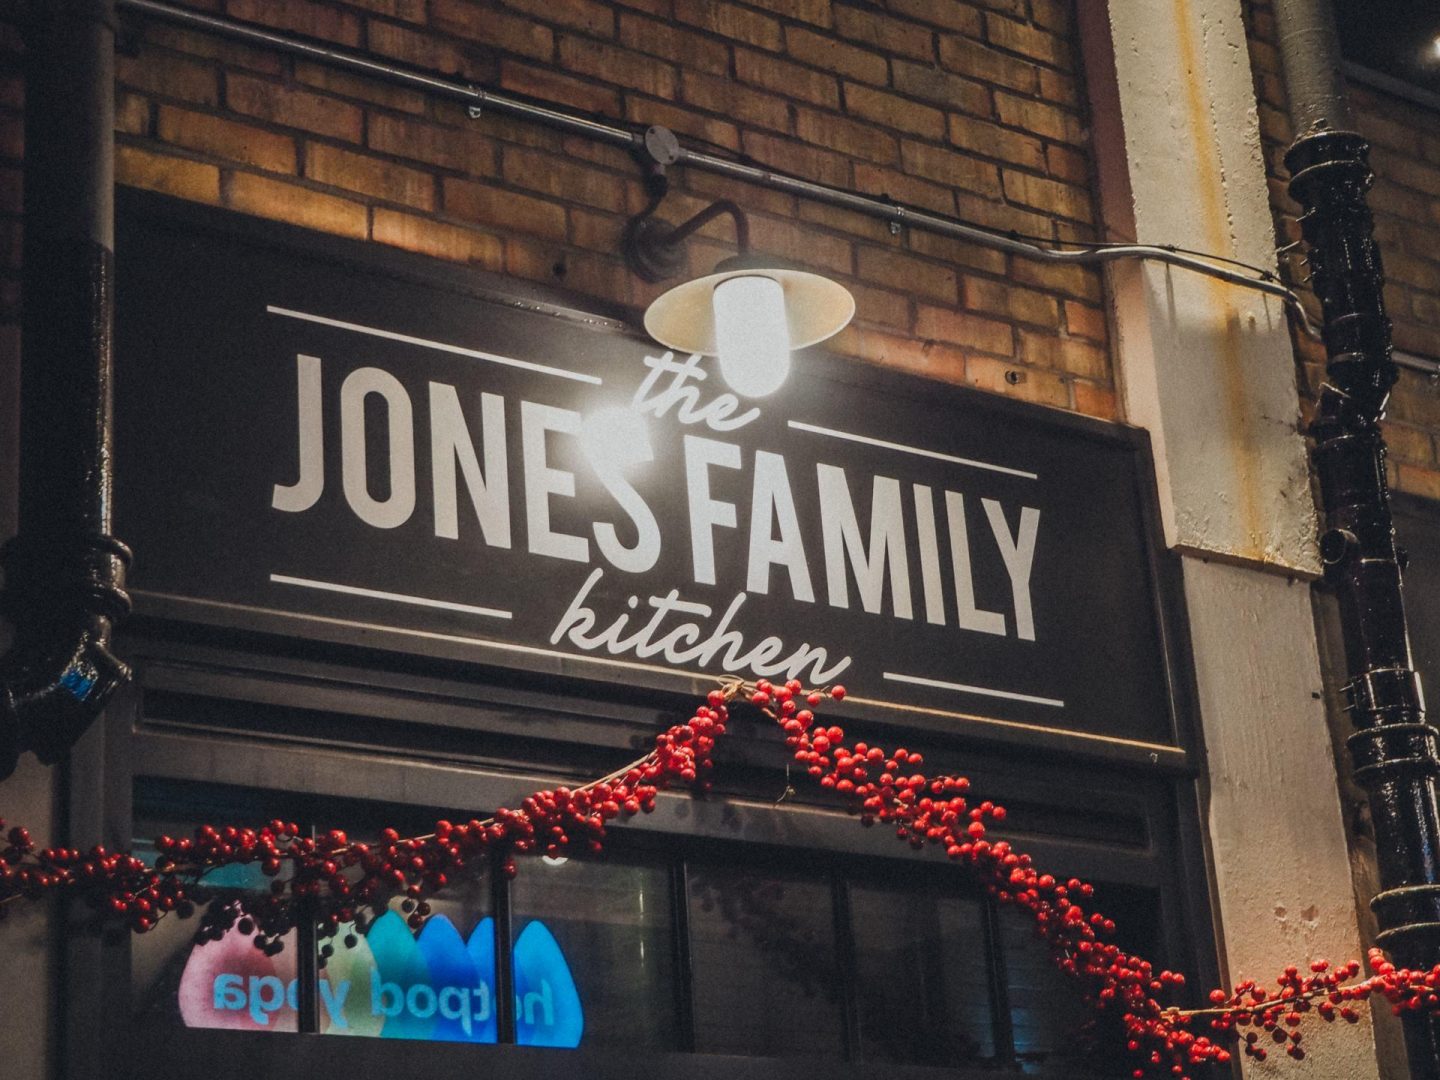 Dinner with The Jones Family Kitchen, London